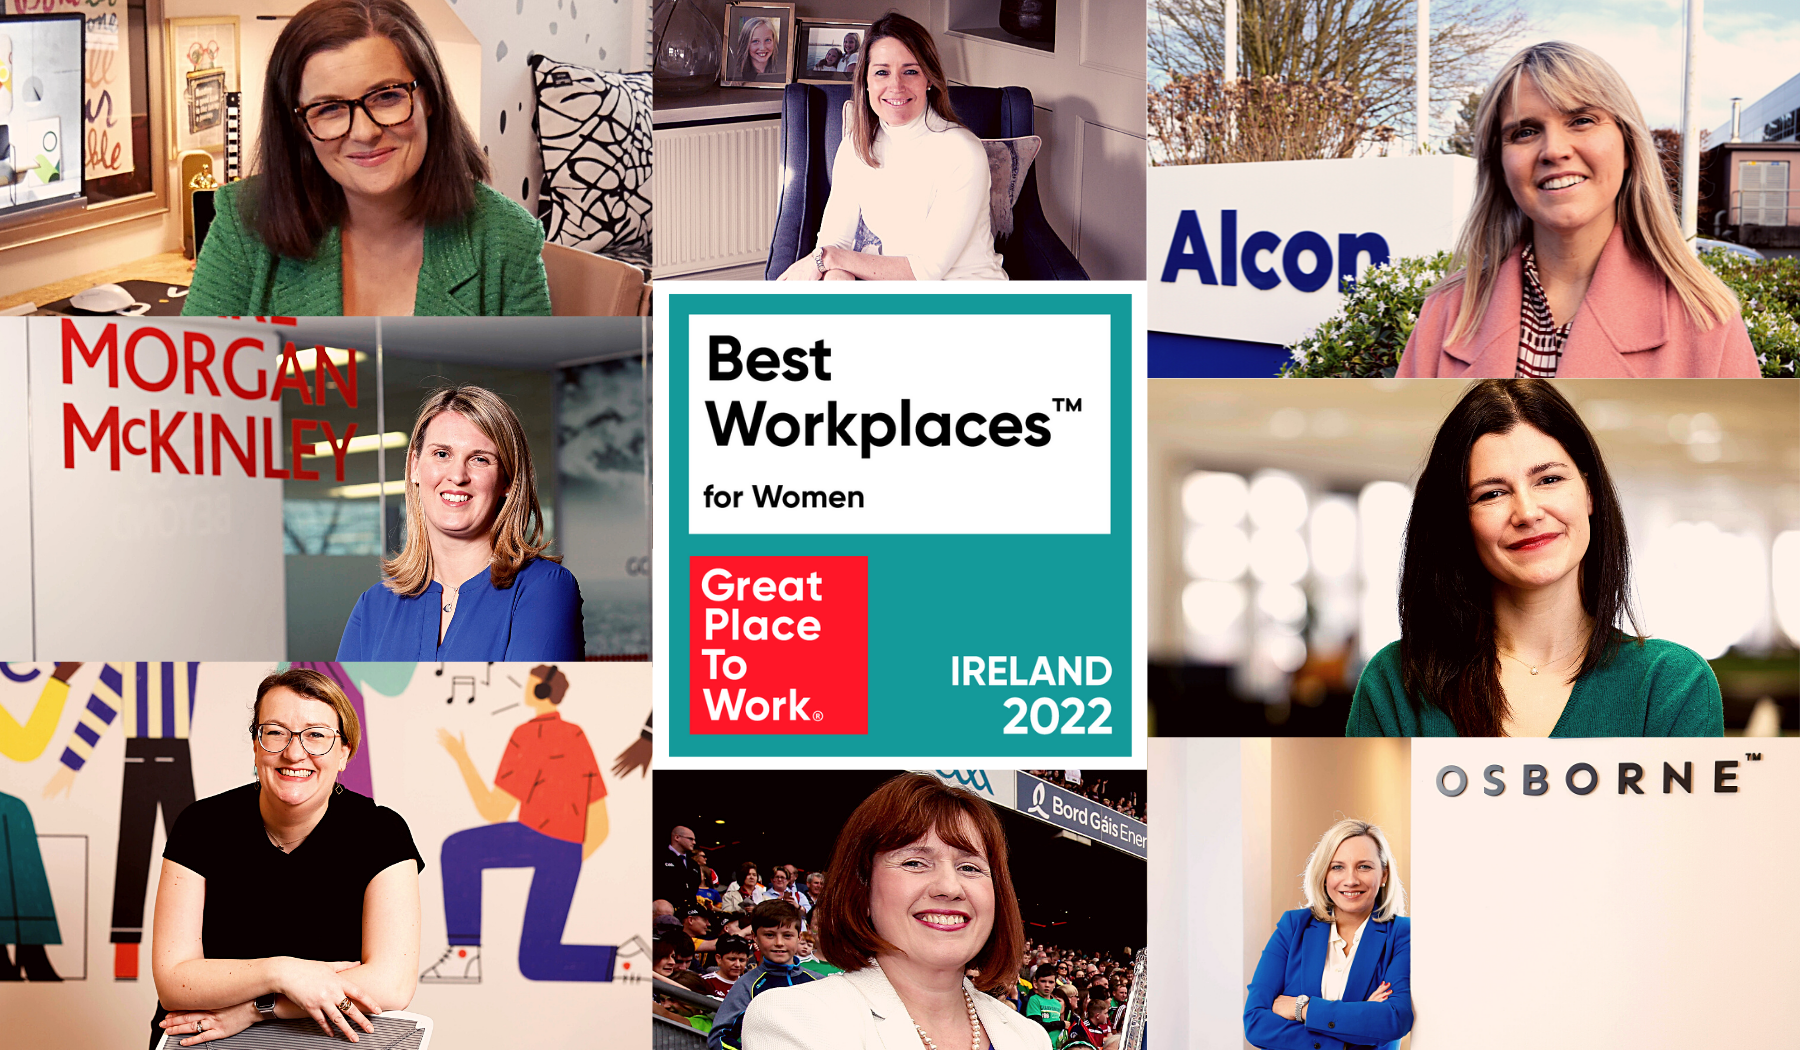 The Best Workplaces for Women™ 2022 are revealed!